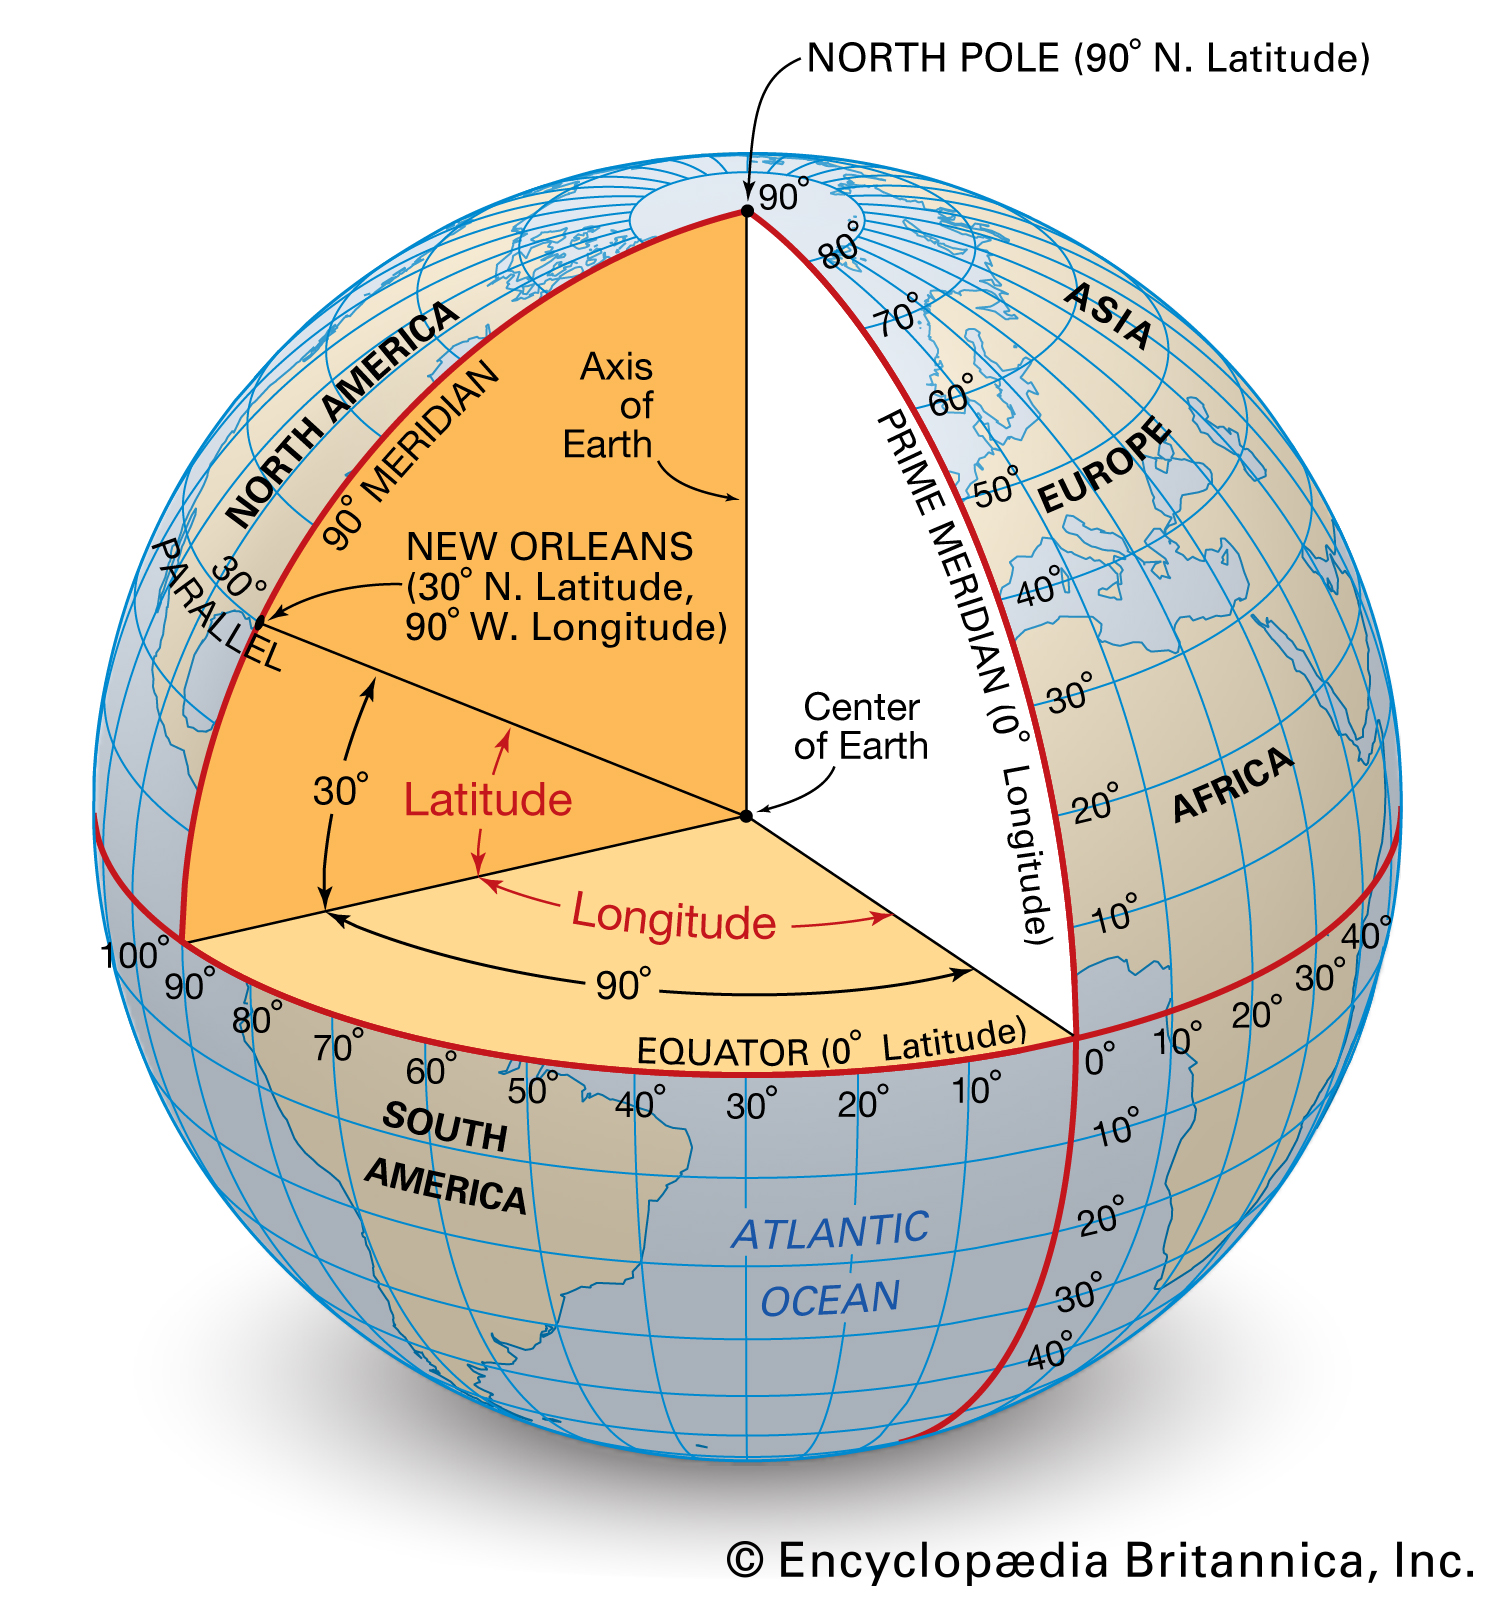 Geographic lines of latitude and longitude.[Source](https://cdn.britannica.com/04/64904-050-D2054D06/cutaway-drawing-latitude-place-longitude-sizes-angles.jpg)